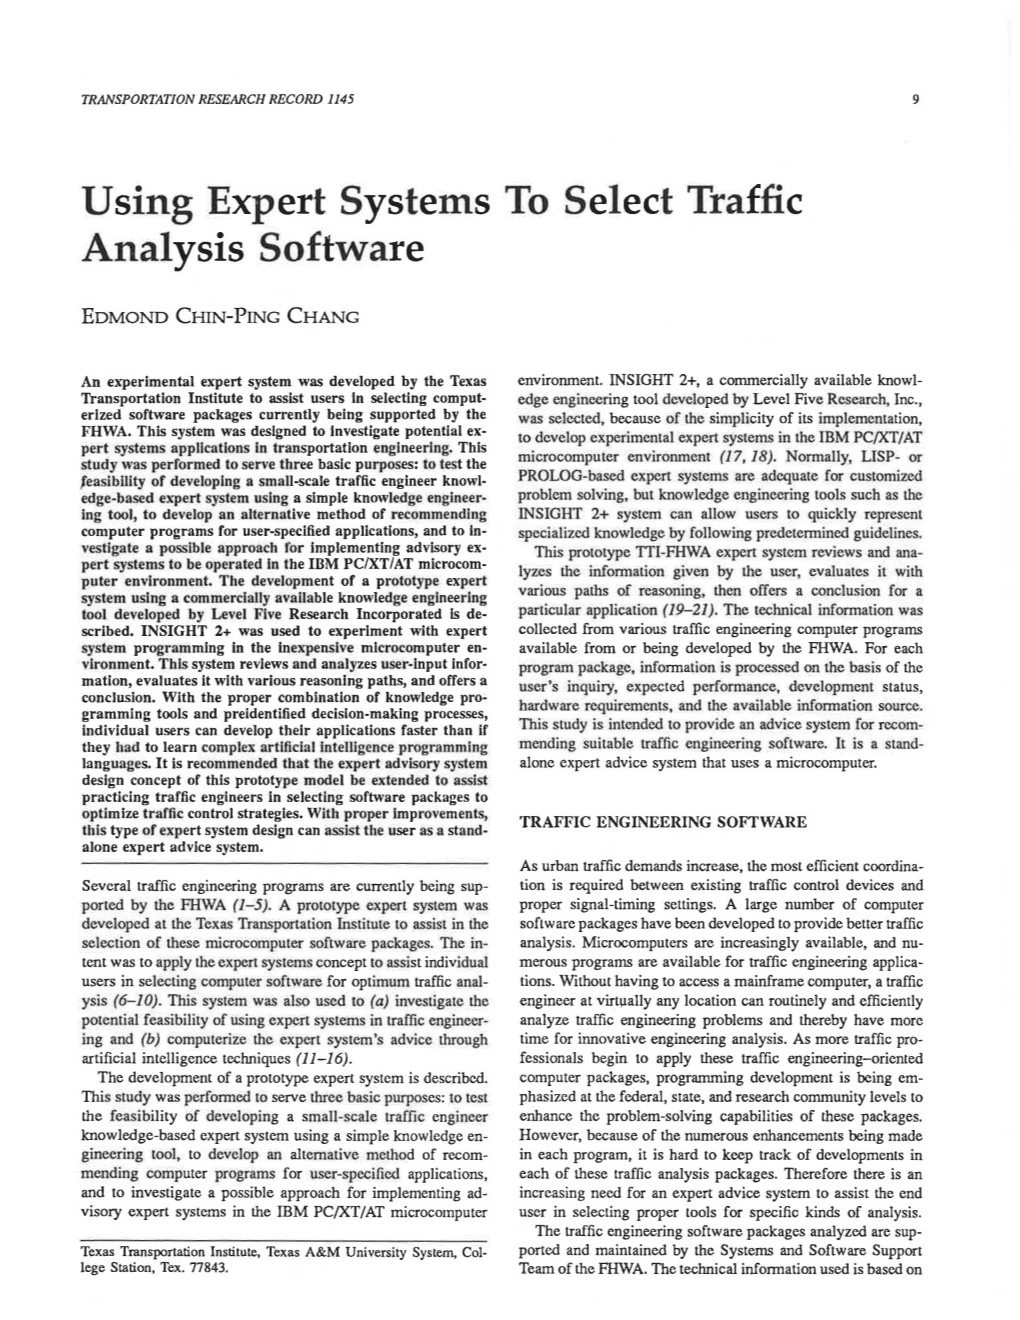 Using Expert Systems to Select Traffic Analysis Software